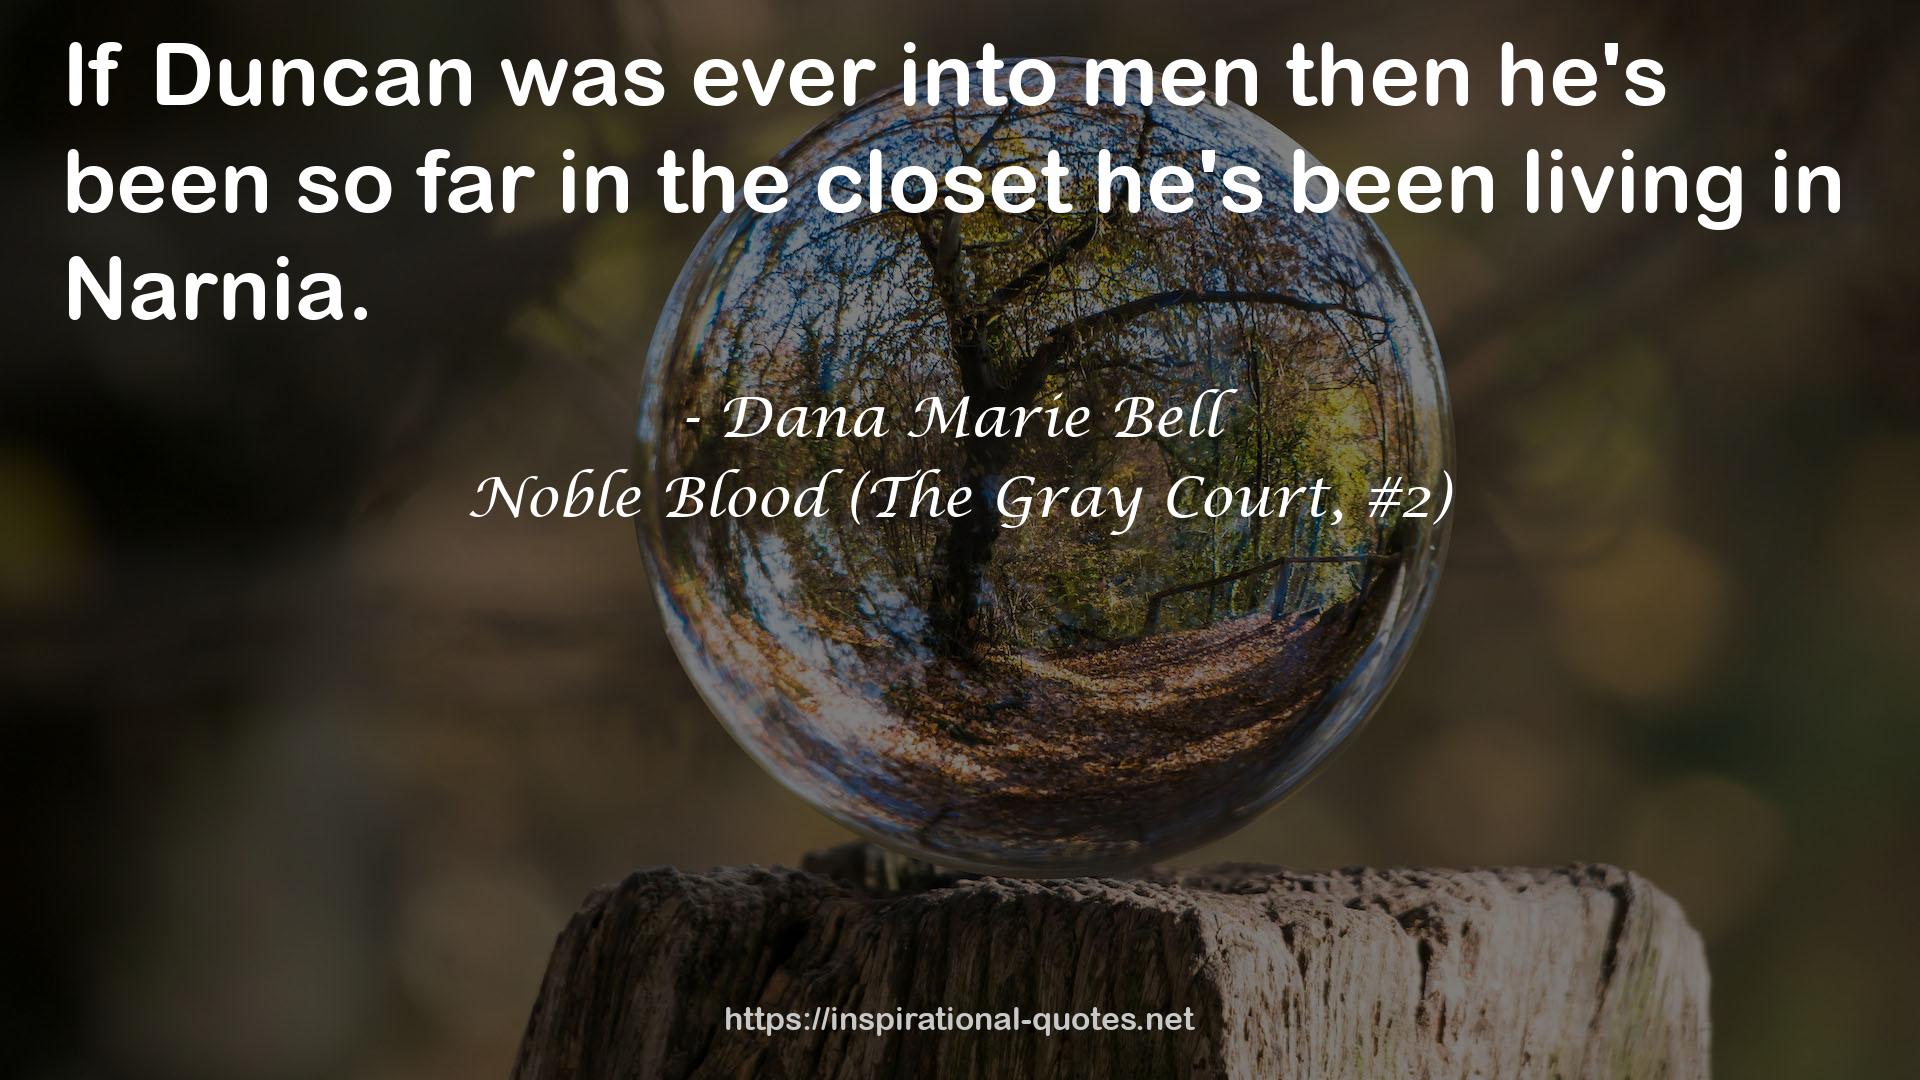 Noble Blood (The Gray Court, #2) QUOTES